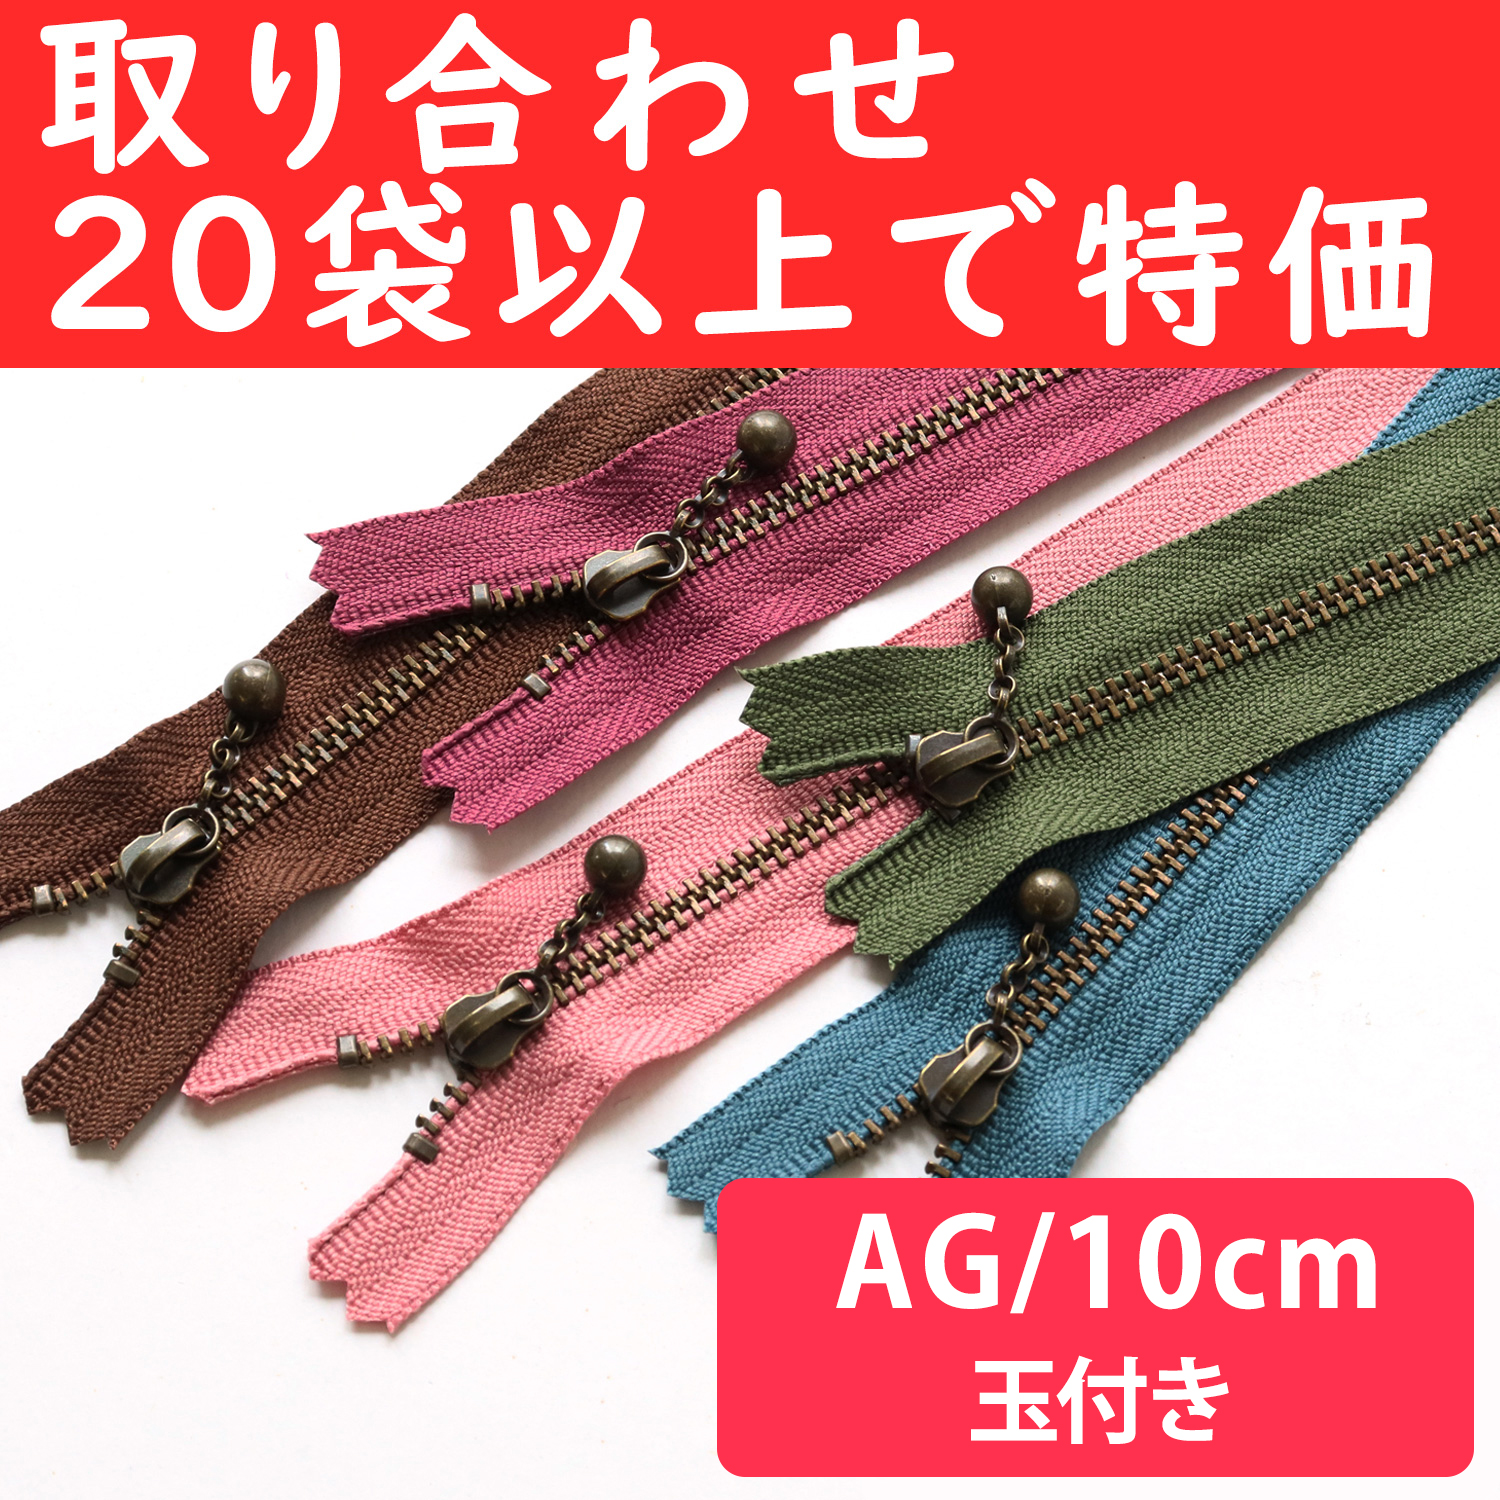 3GKB10-OVER200 Special)Ball Pull Zippers  AG 10cm ", orders with 20 bags or more (bag)